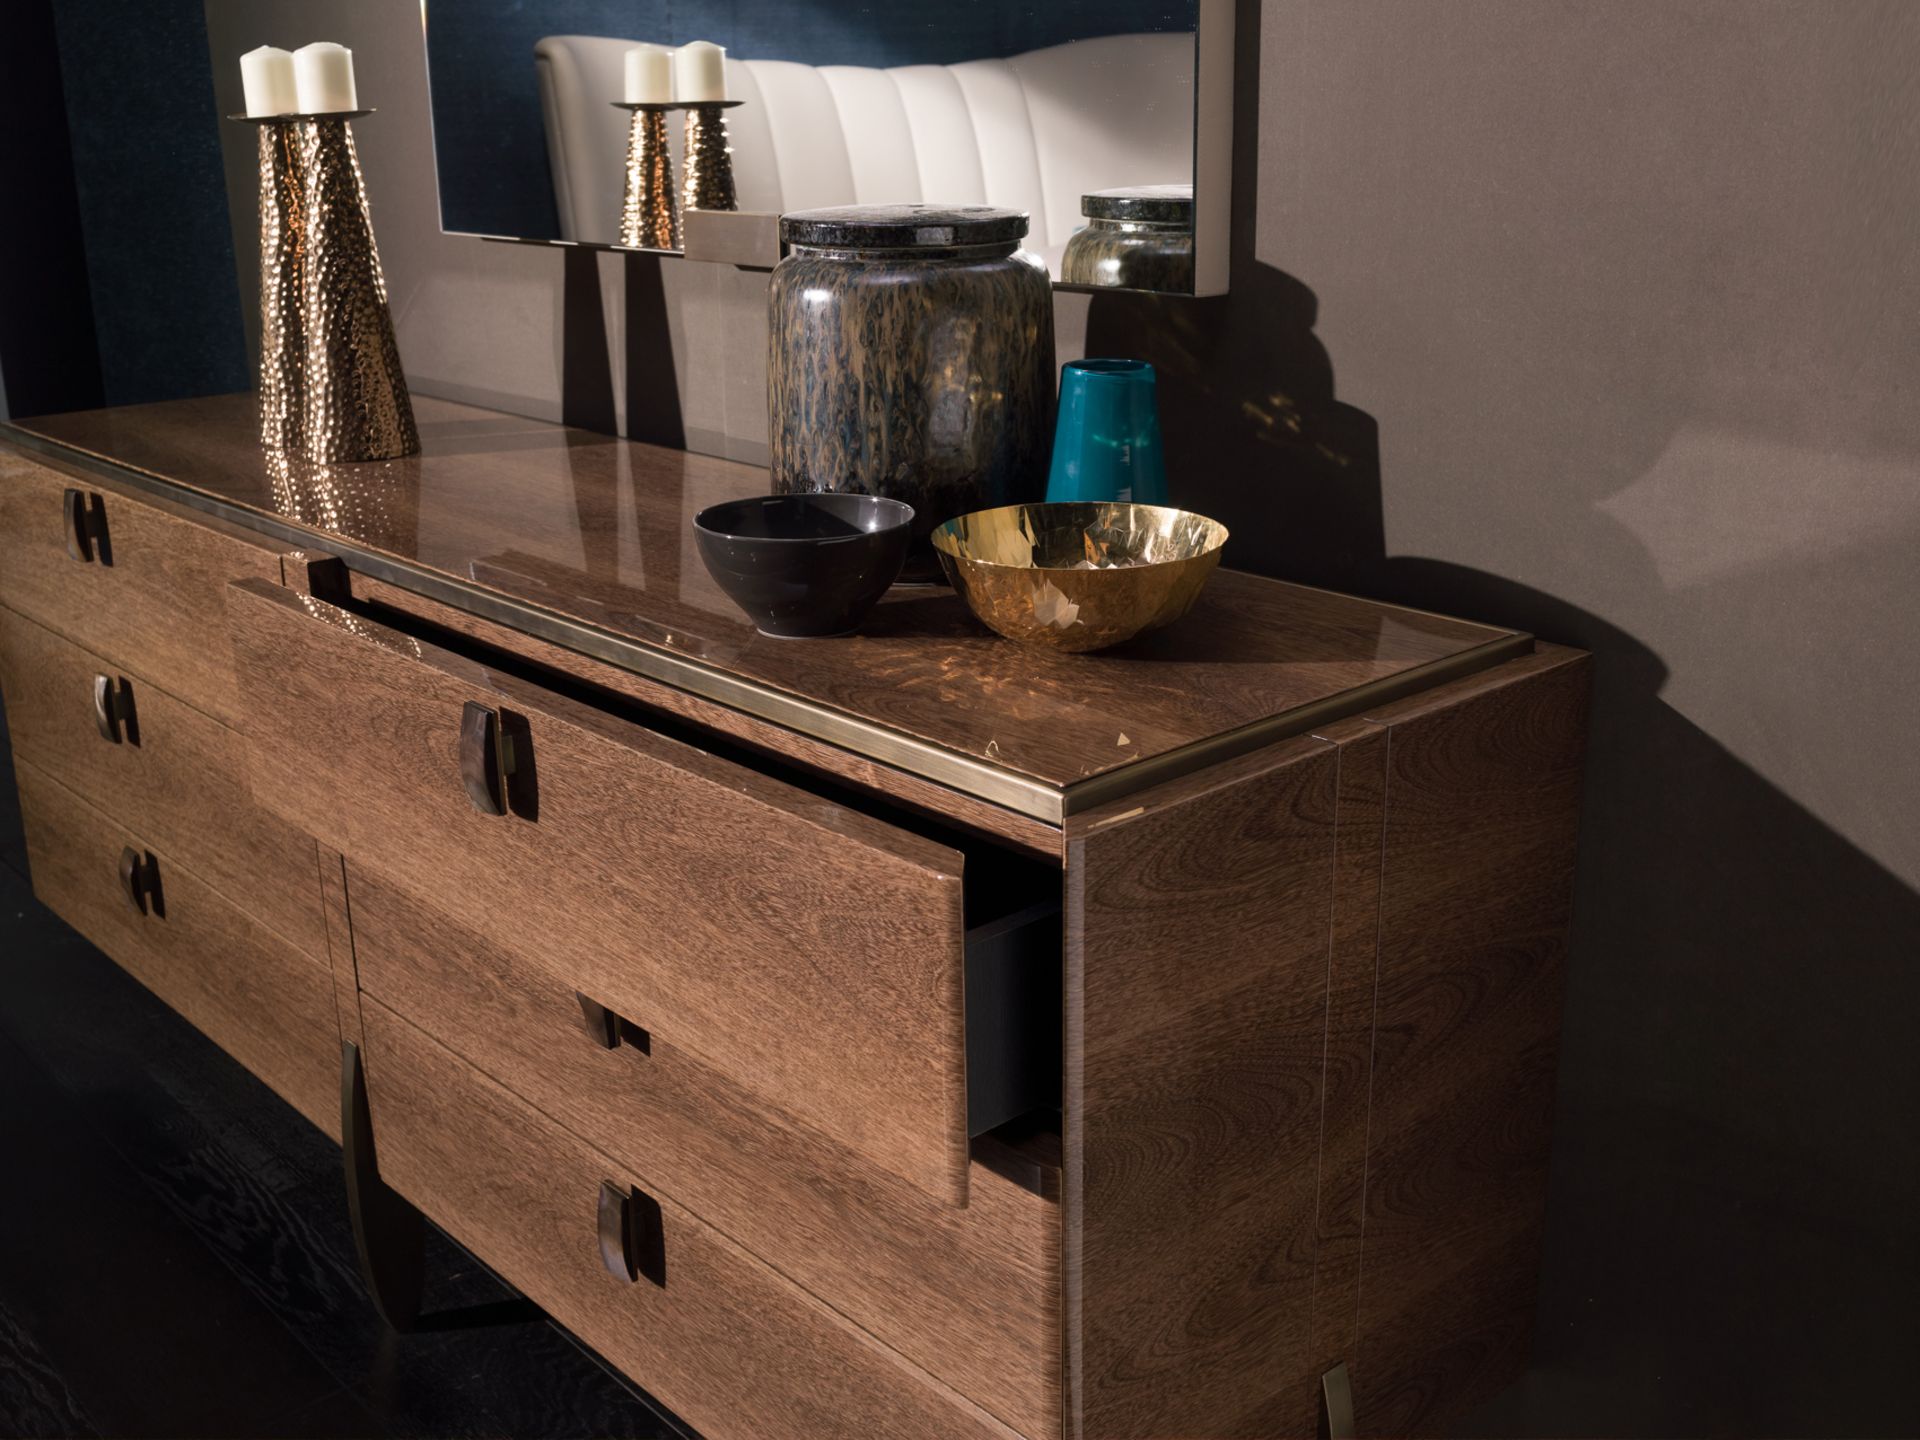 Fashion Affair Bedroom Cabinet by Telemaco for Malerba The Dresser has six drawers, is decorated - Bild 7 aus 15